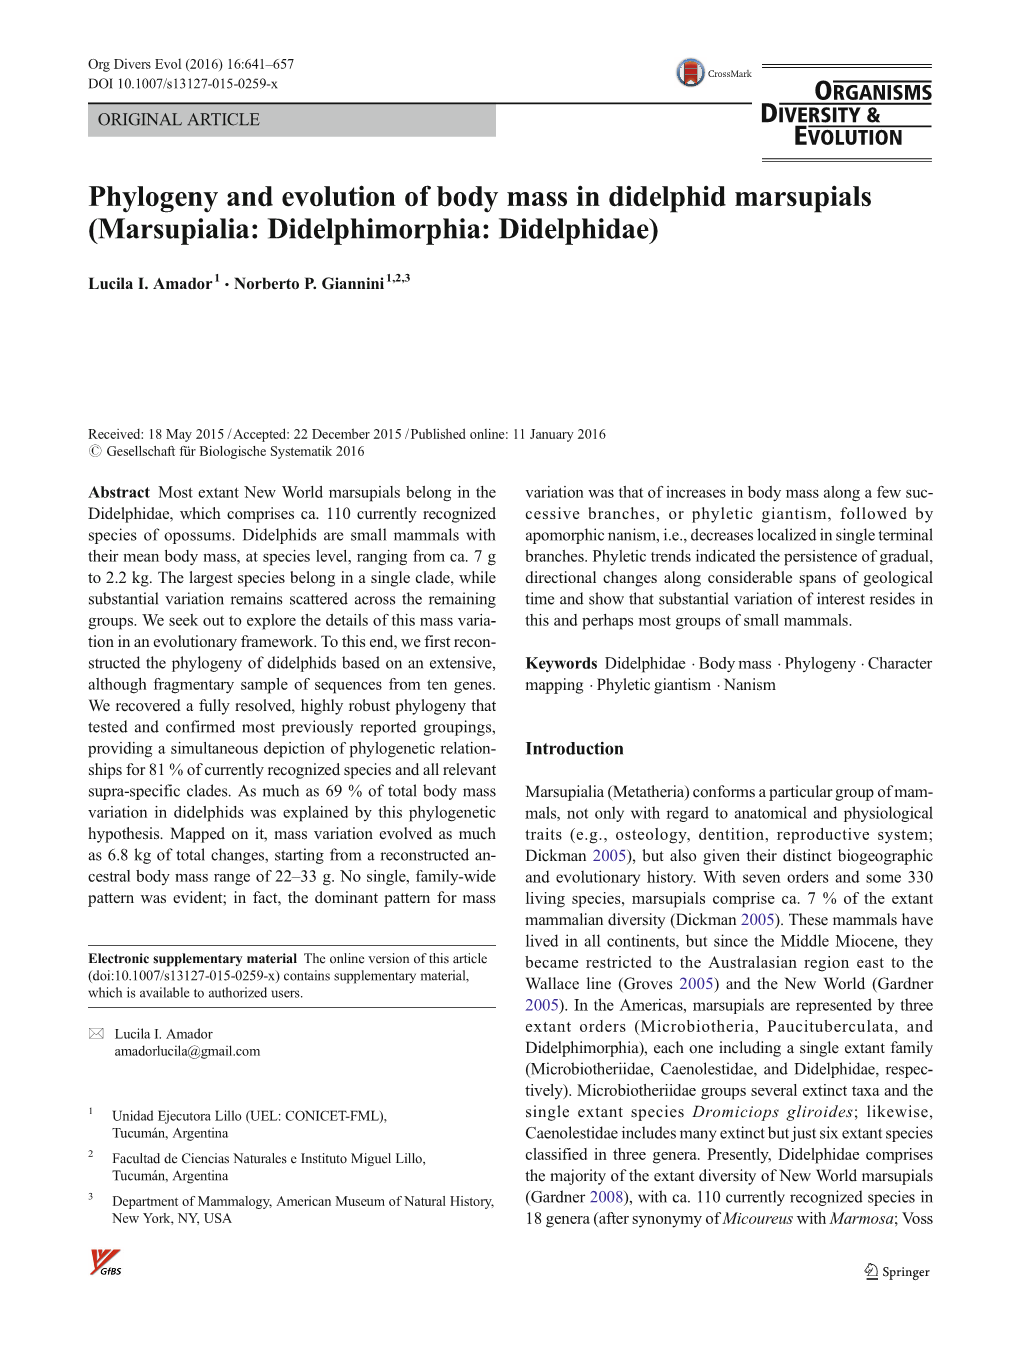 Phylogeny and Evolution of Body Mass in Didelphid Marsupials (Marsupialia: Didelphimorphia: Didelphidae)